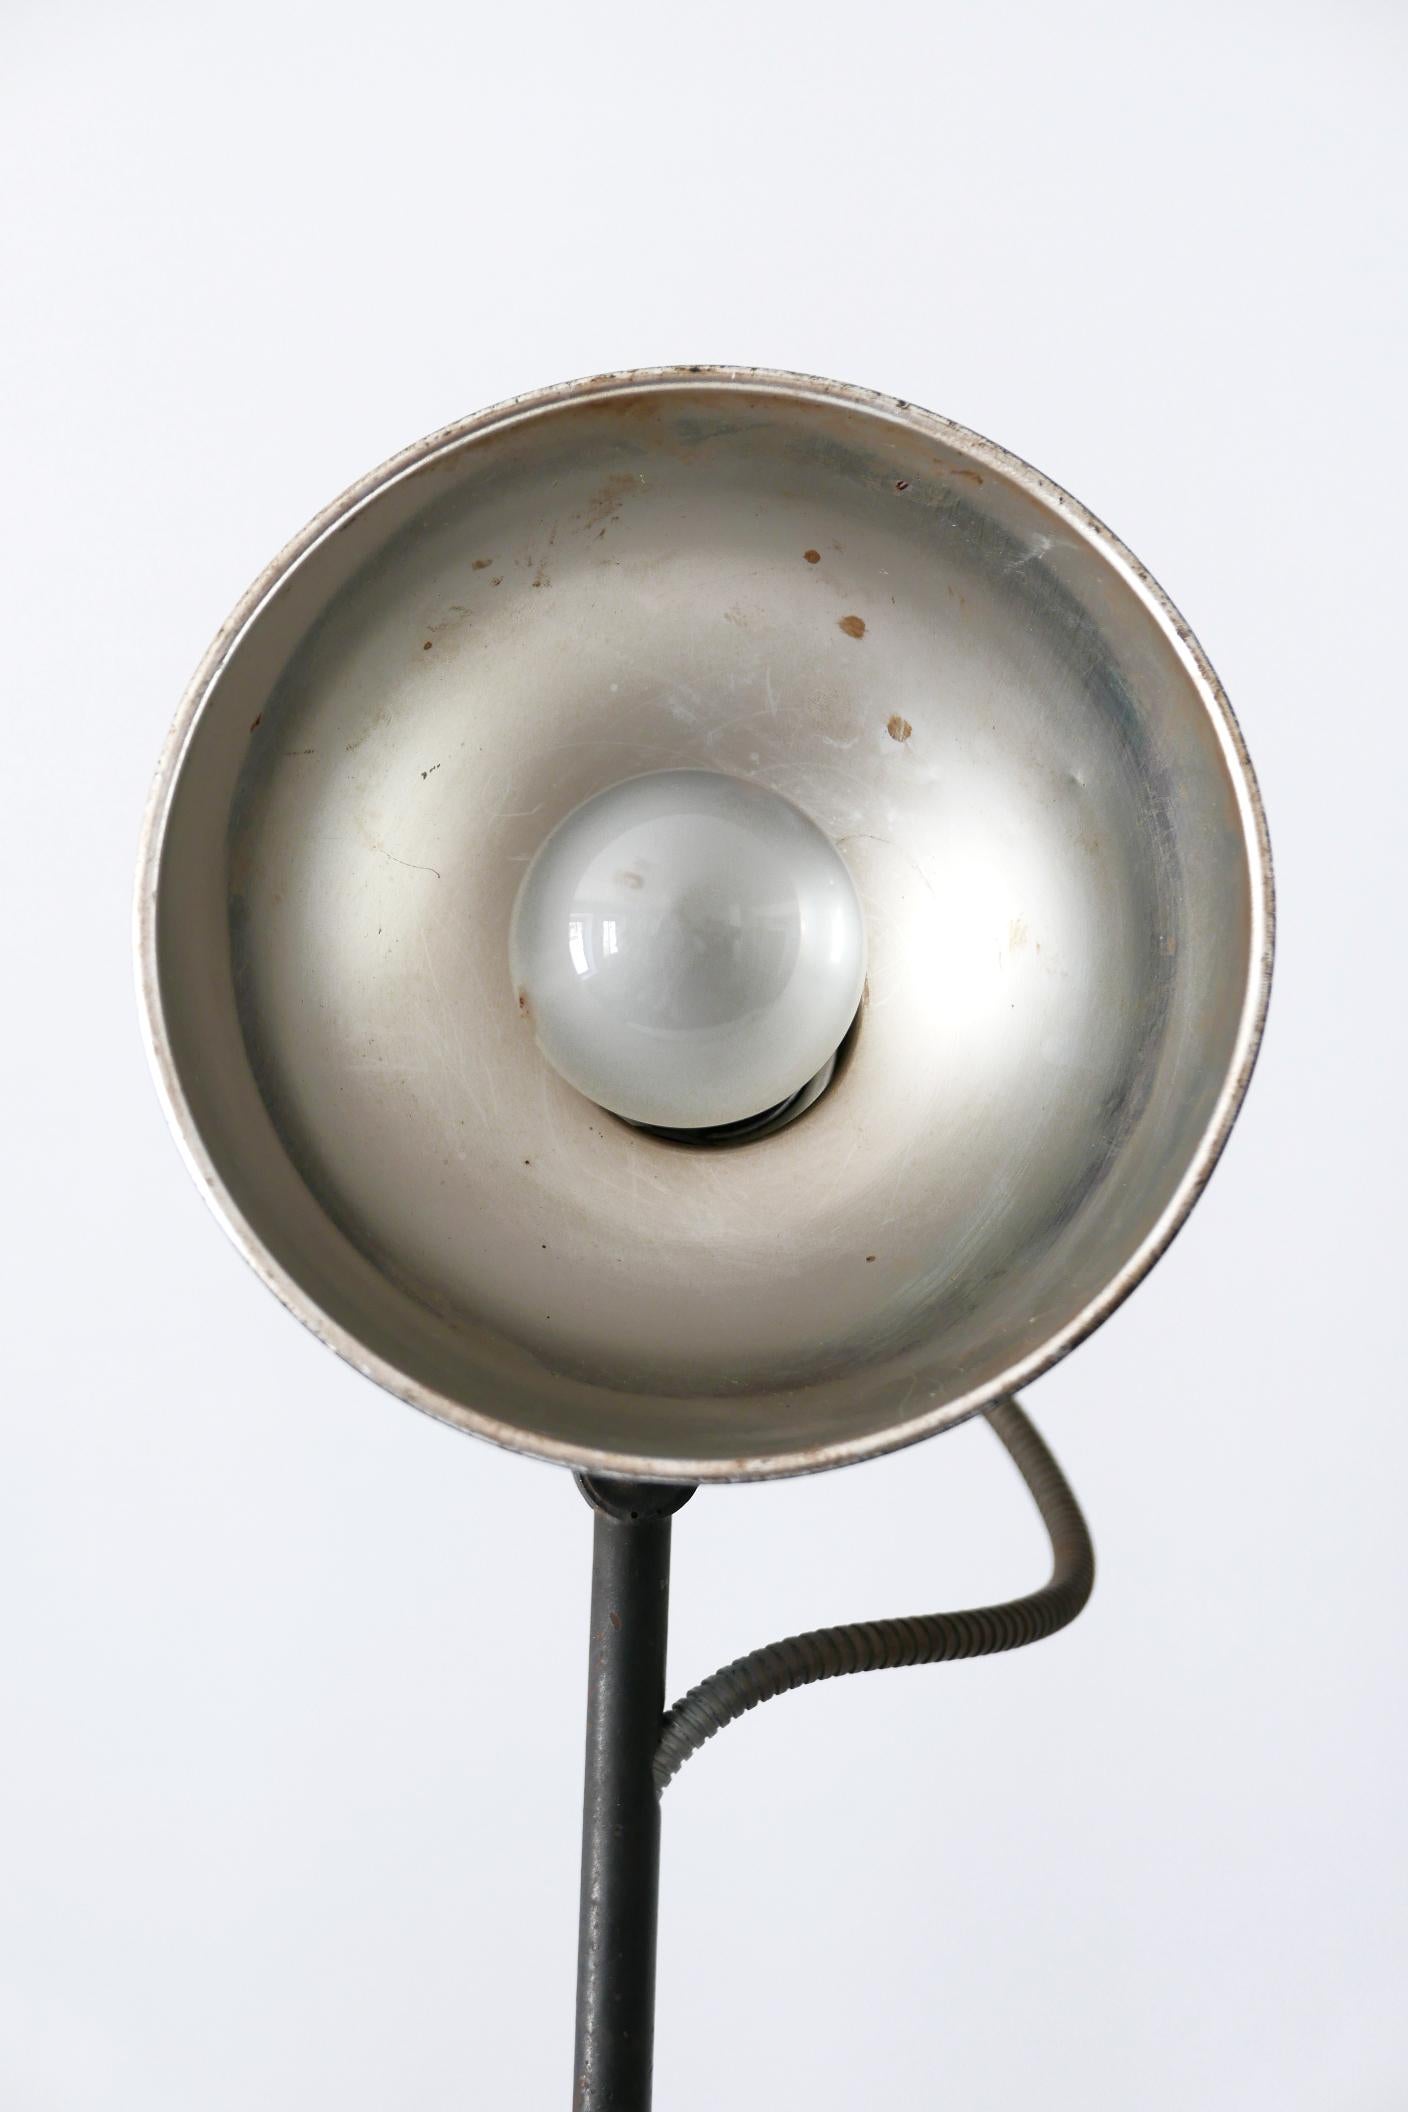 Exceptional Articulated Bauhaus Workshop Wall Lamp or Task Light 1920s Germany For Sale 9